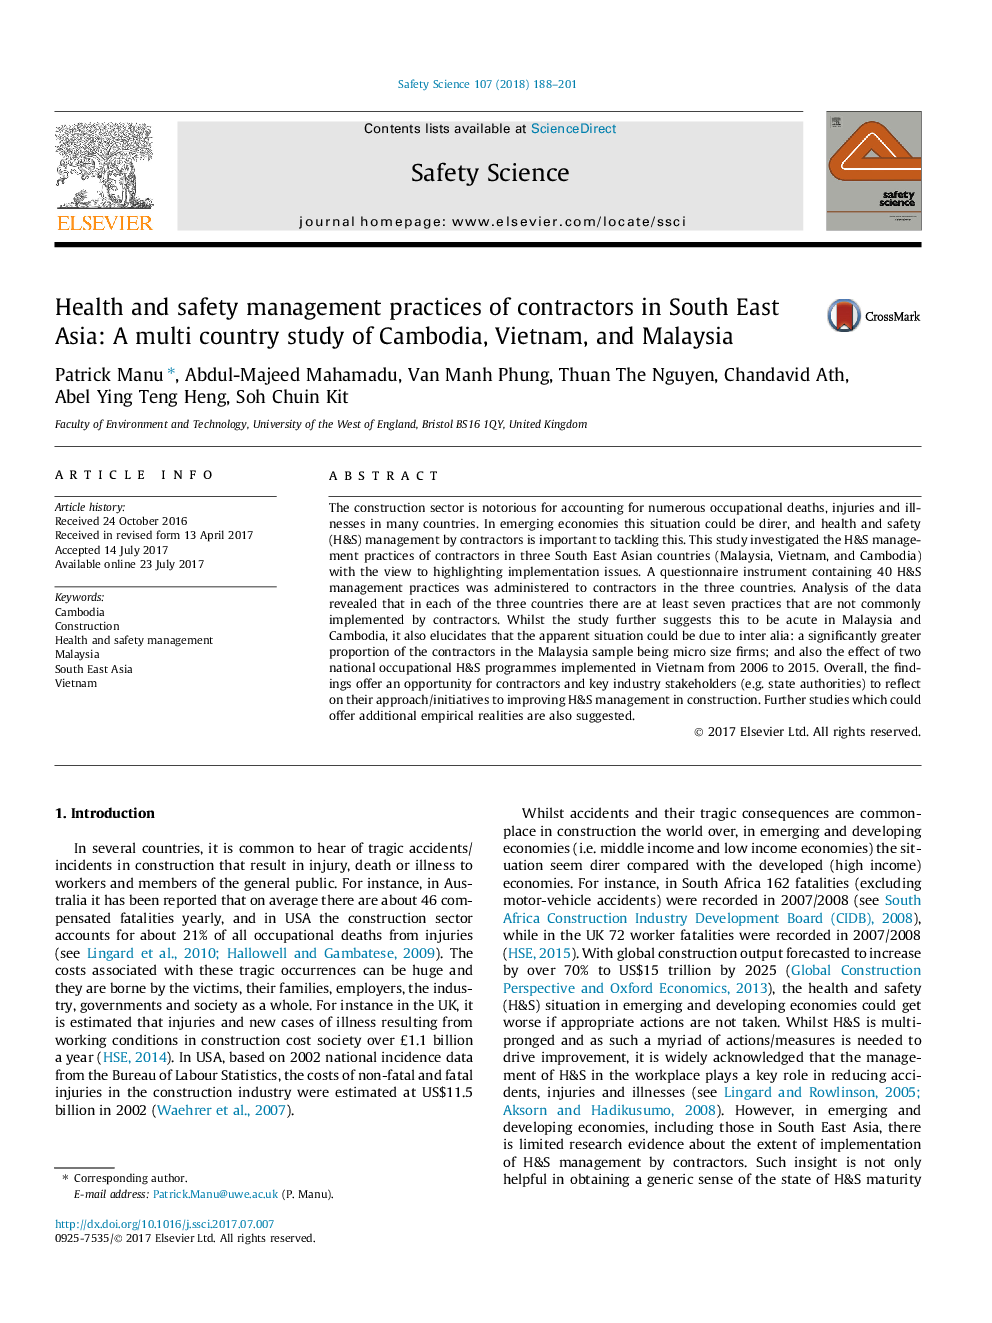 Health and safety management practices of contractors in South East Asia: A multi country study of Cambodia, Vietnam, and Malaysia